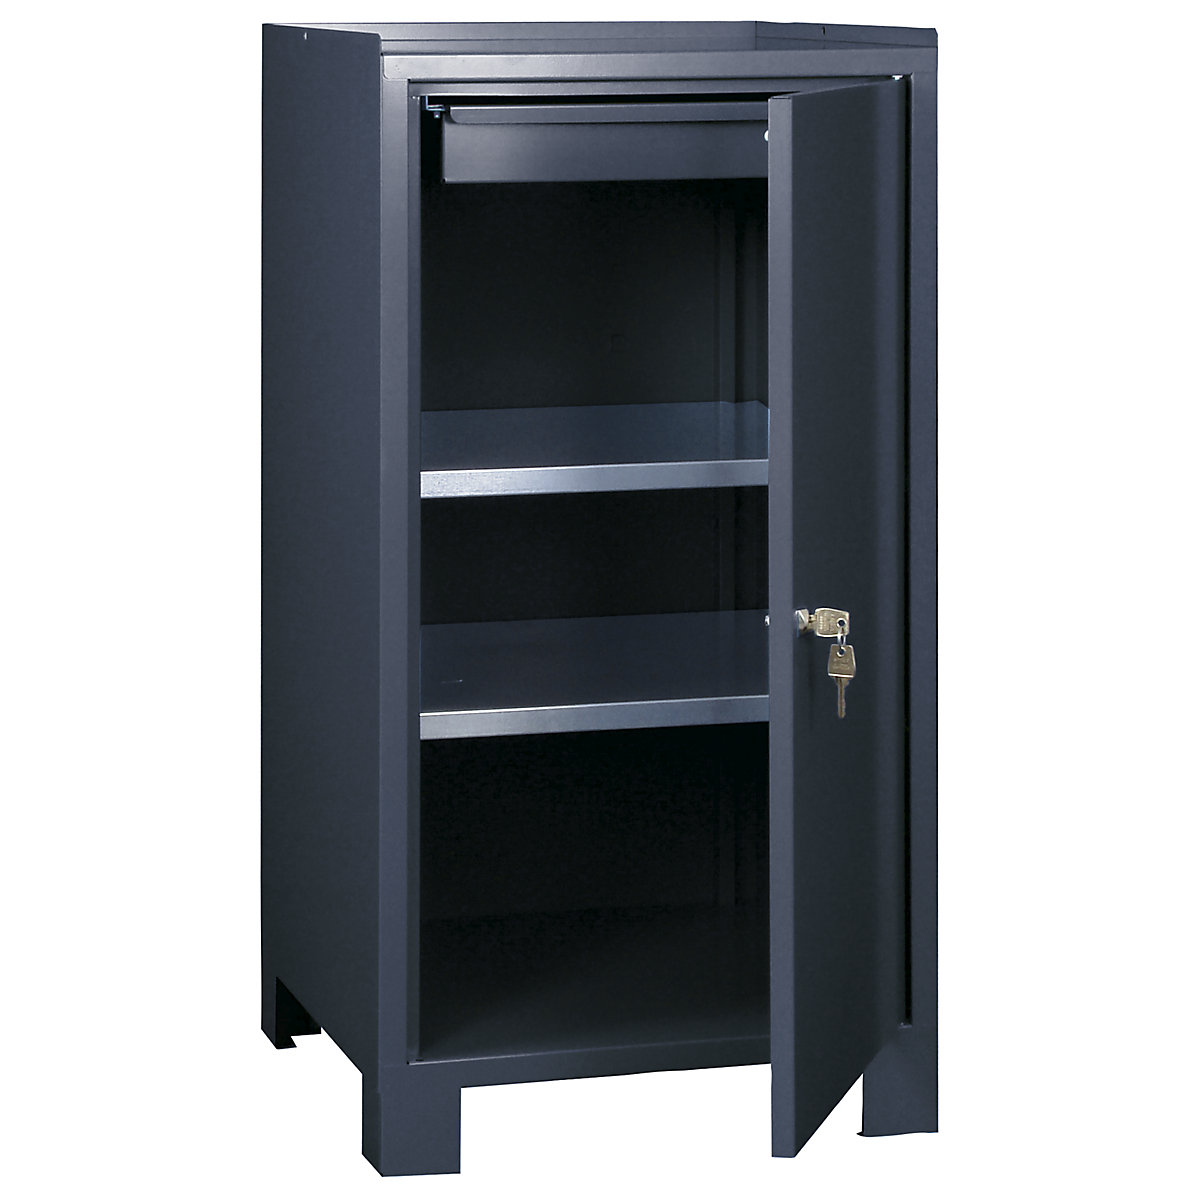 Tool cupboard with feet – Wolf